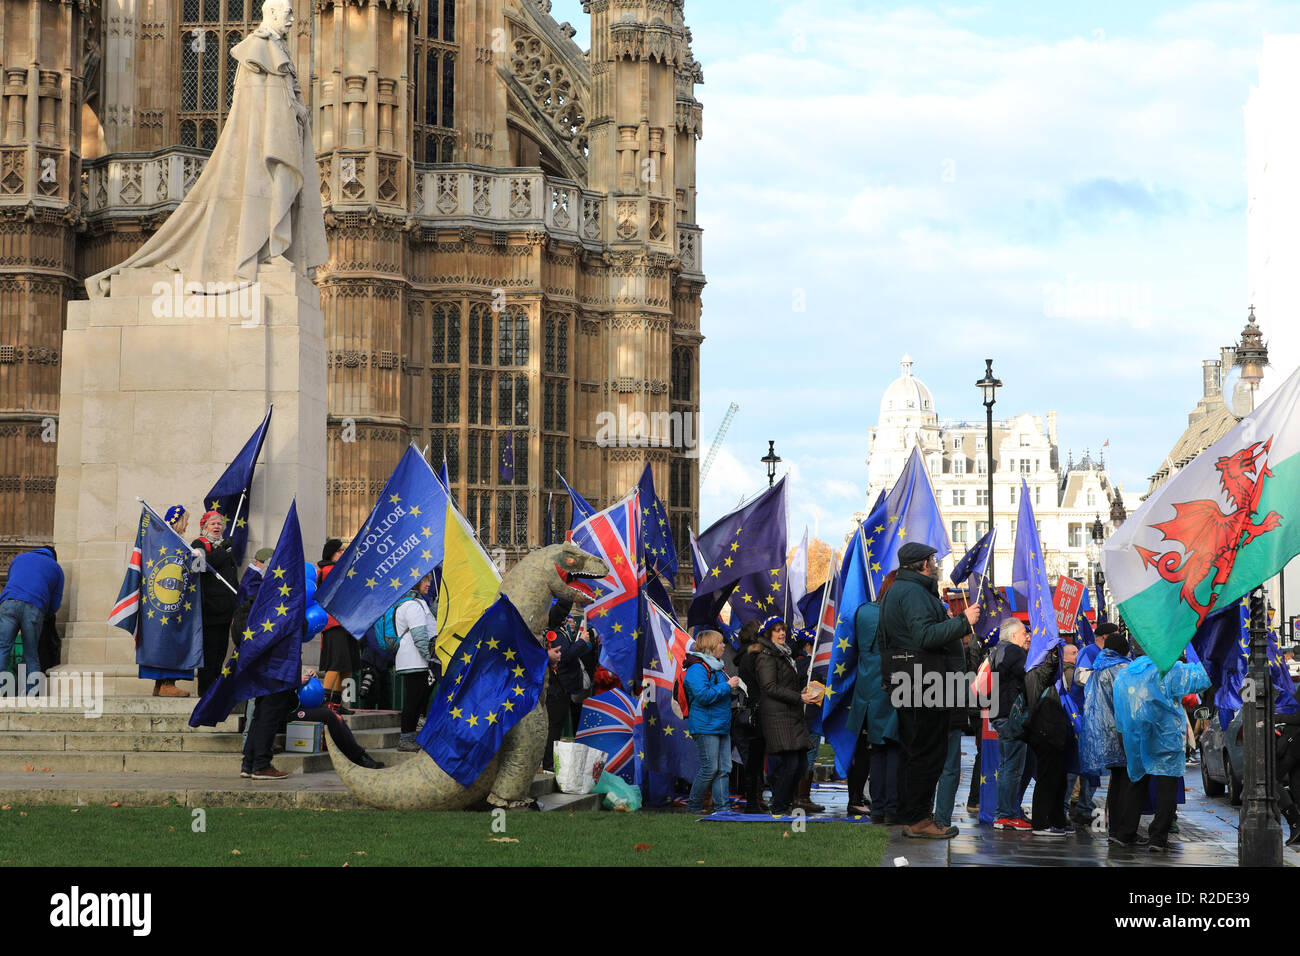 Westminster, London, UK, 19th Nov 2018. Anti-Brexit protesters from SODEM (Stand in Defiance European Movement), led by 'shouty man' Steve Bray, and including a large dinosaur, have turned out in large numbers outside the Houses of Parliament in Westminster to demonstrate against Brexit and for a 'People's Vote' on the eventual deal. Credit: Imageplotter News and Sports/Alamy Live News Stock Photo